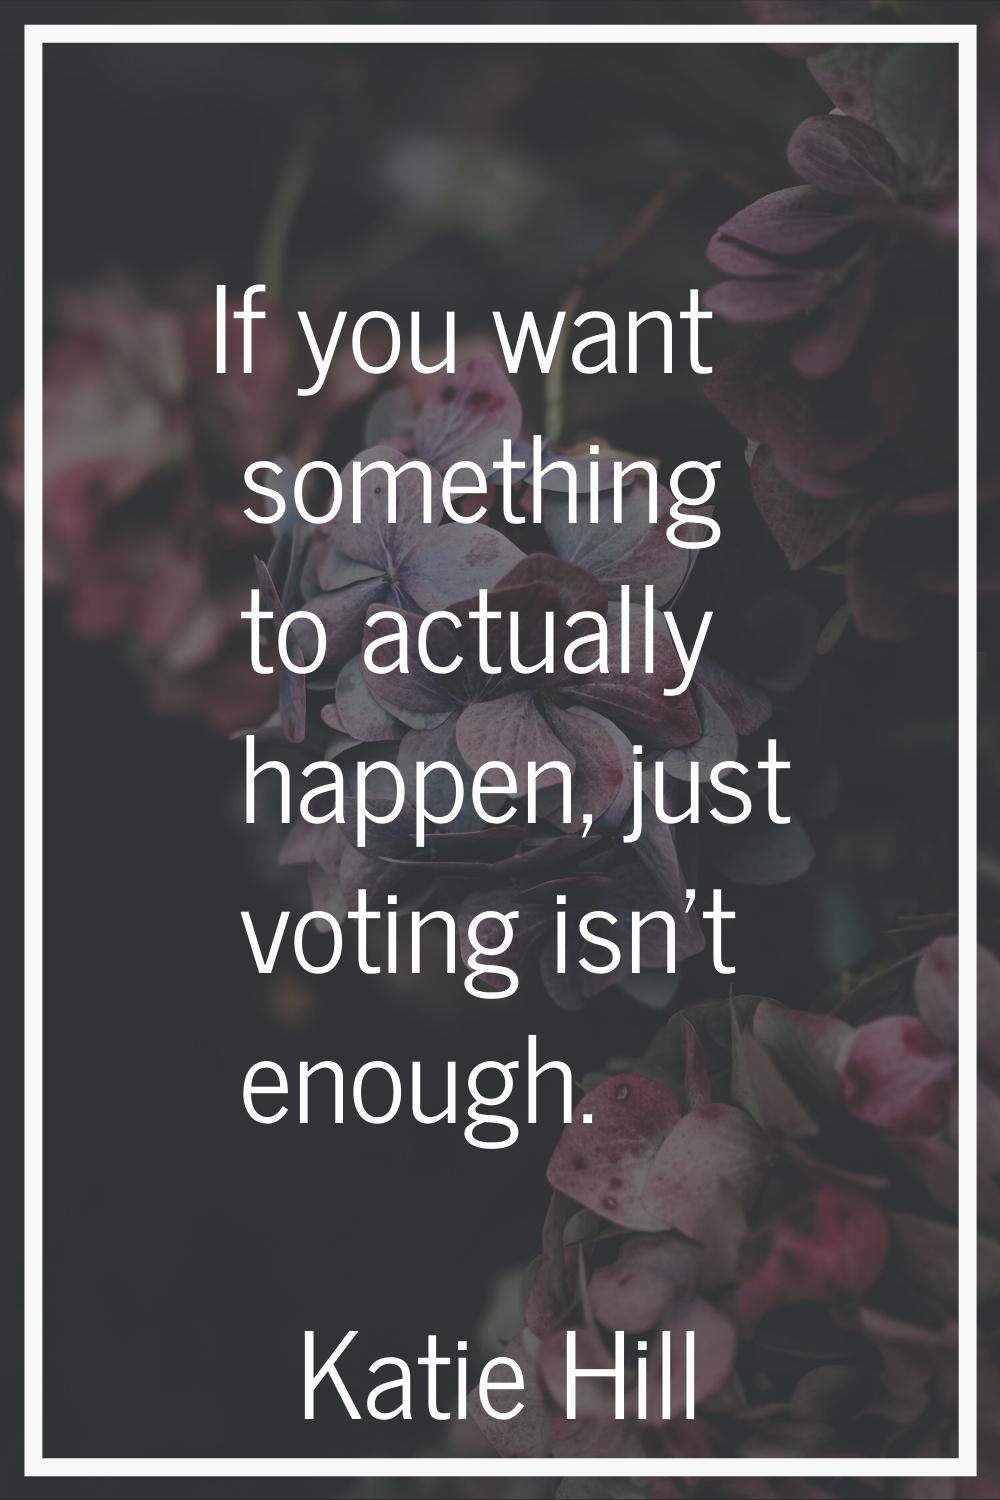 If you want something to actually happen, just voting isn't enough.